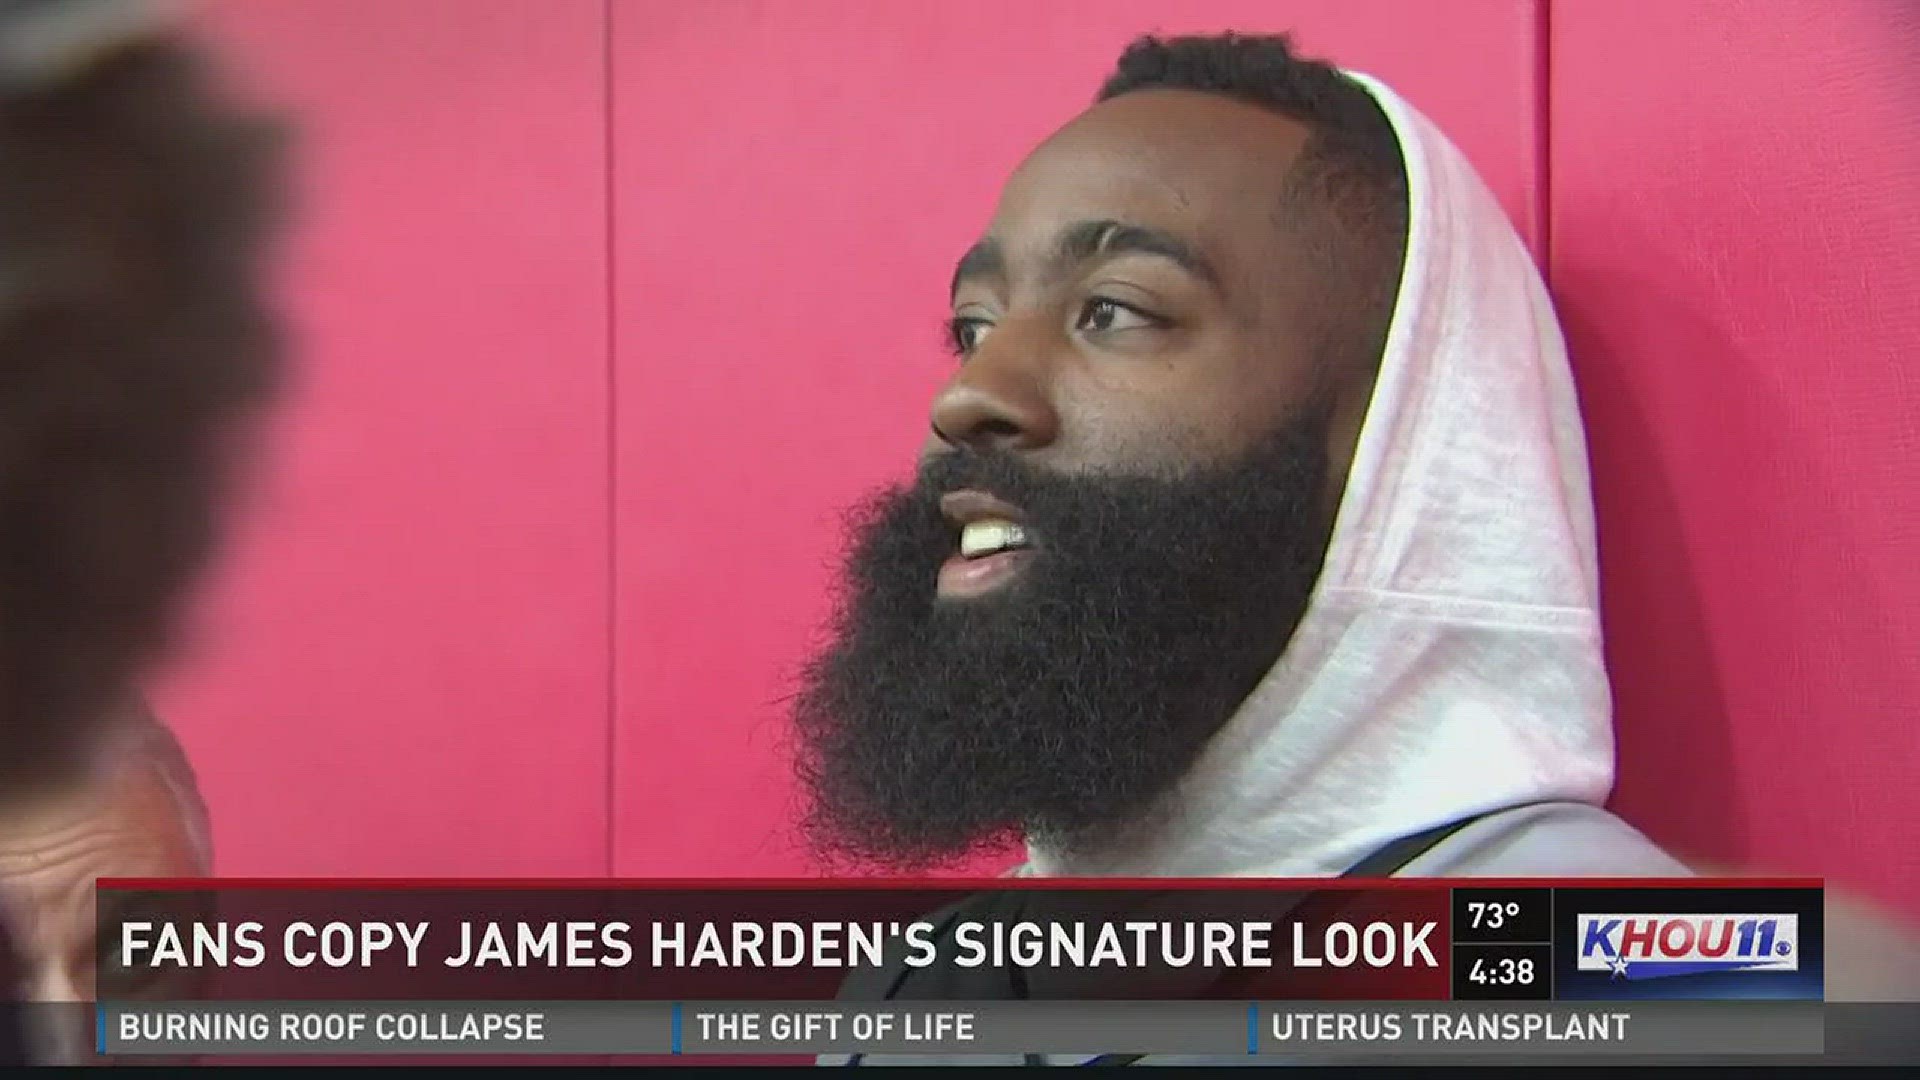 Many Houston fans are trying to copy the bearded look of Rockets All-Star James Harden.